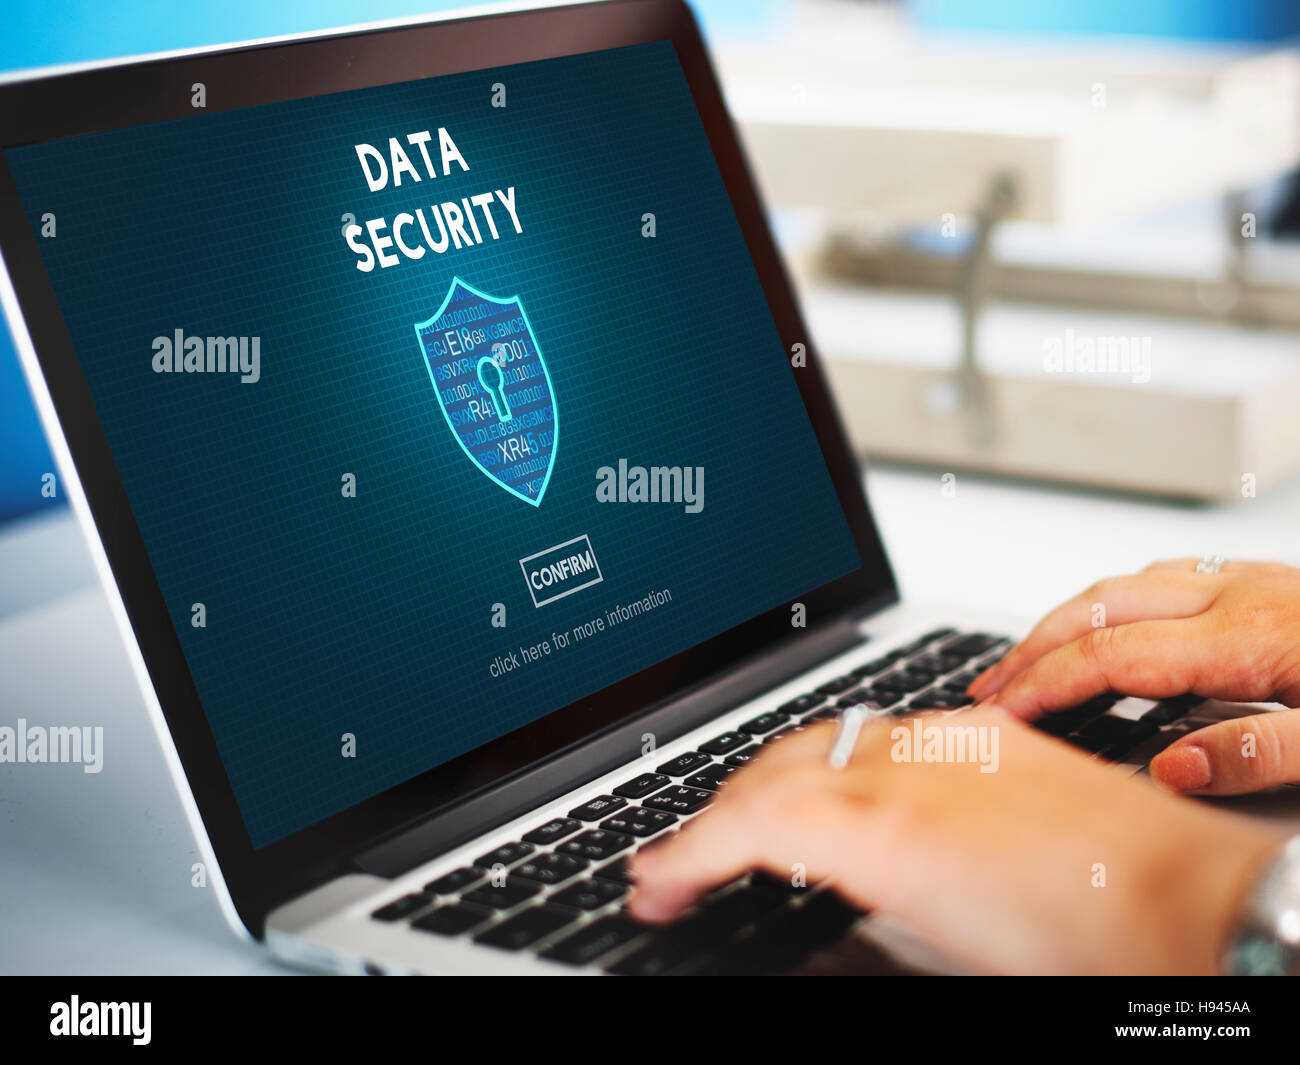 Data Security Privacy Online Security Protection Concept Stock Photo